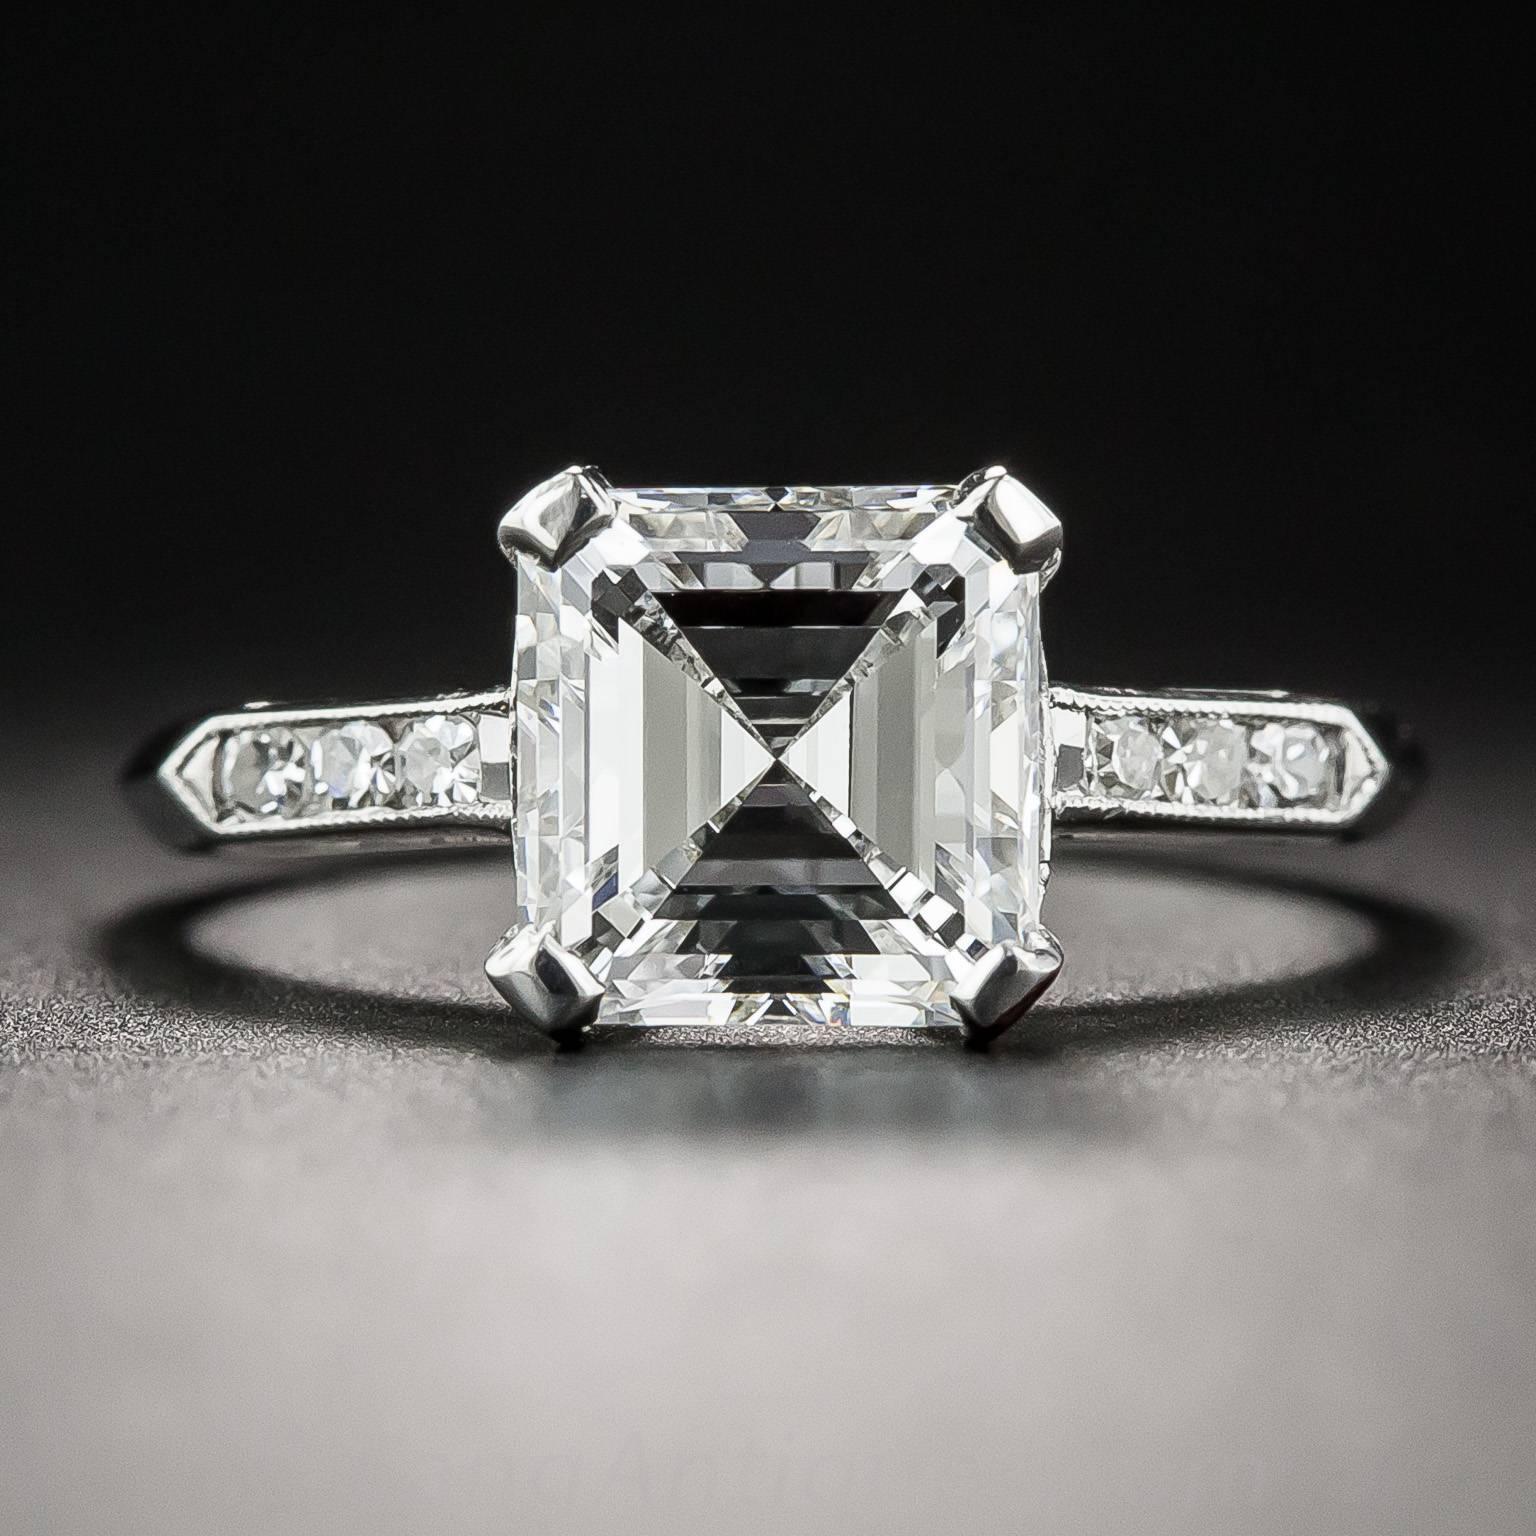 A bright icy-white and square emerald-cut (aka Asscher-cut) diamond, accompanied by a GIA Diamond Grading Report stating: F color - VS1 clarity, radiates from within a sleekly tailored hand-fabricated platinum mounting, modestly embellished with